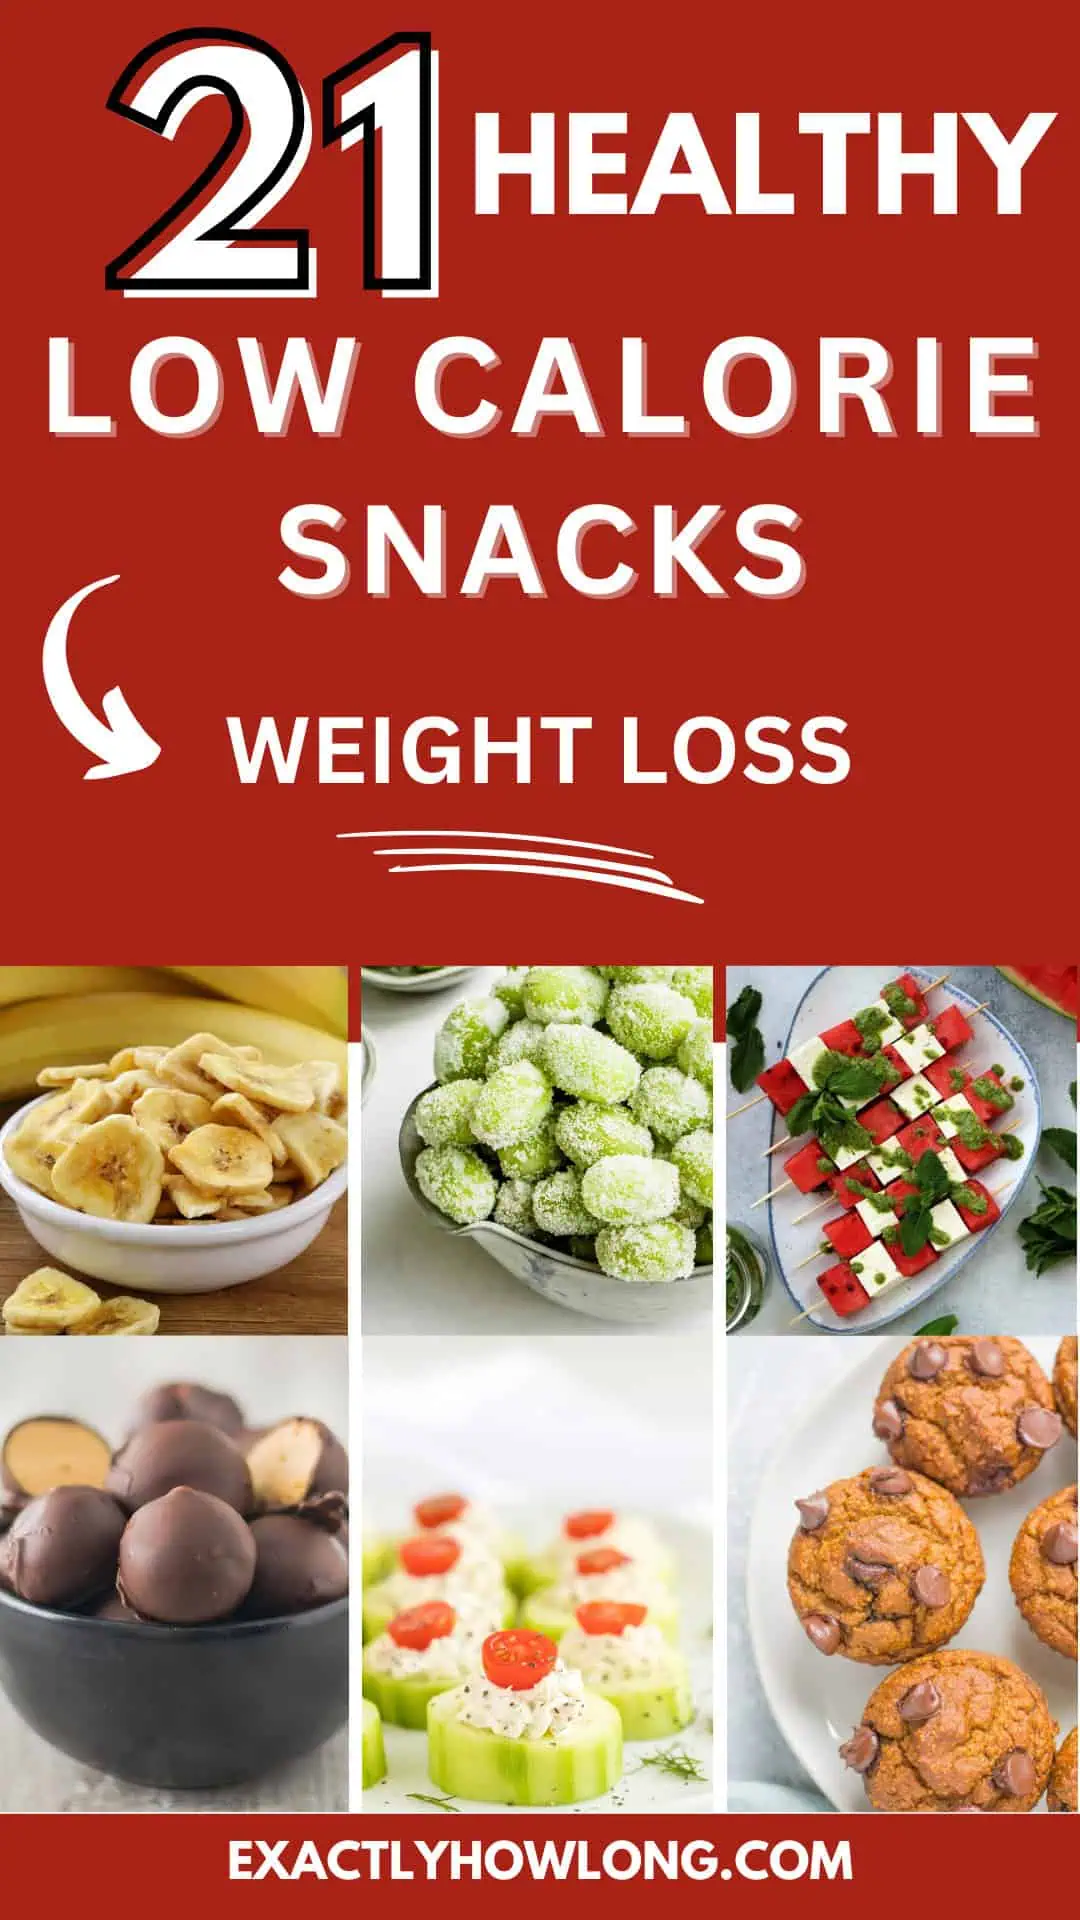 Low calorie snacks for weight loss that are healthy